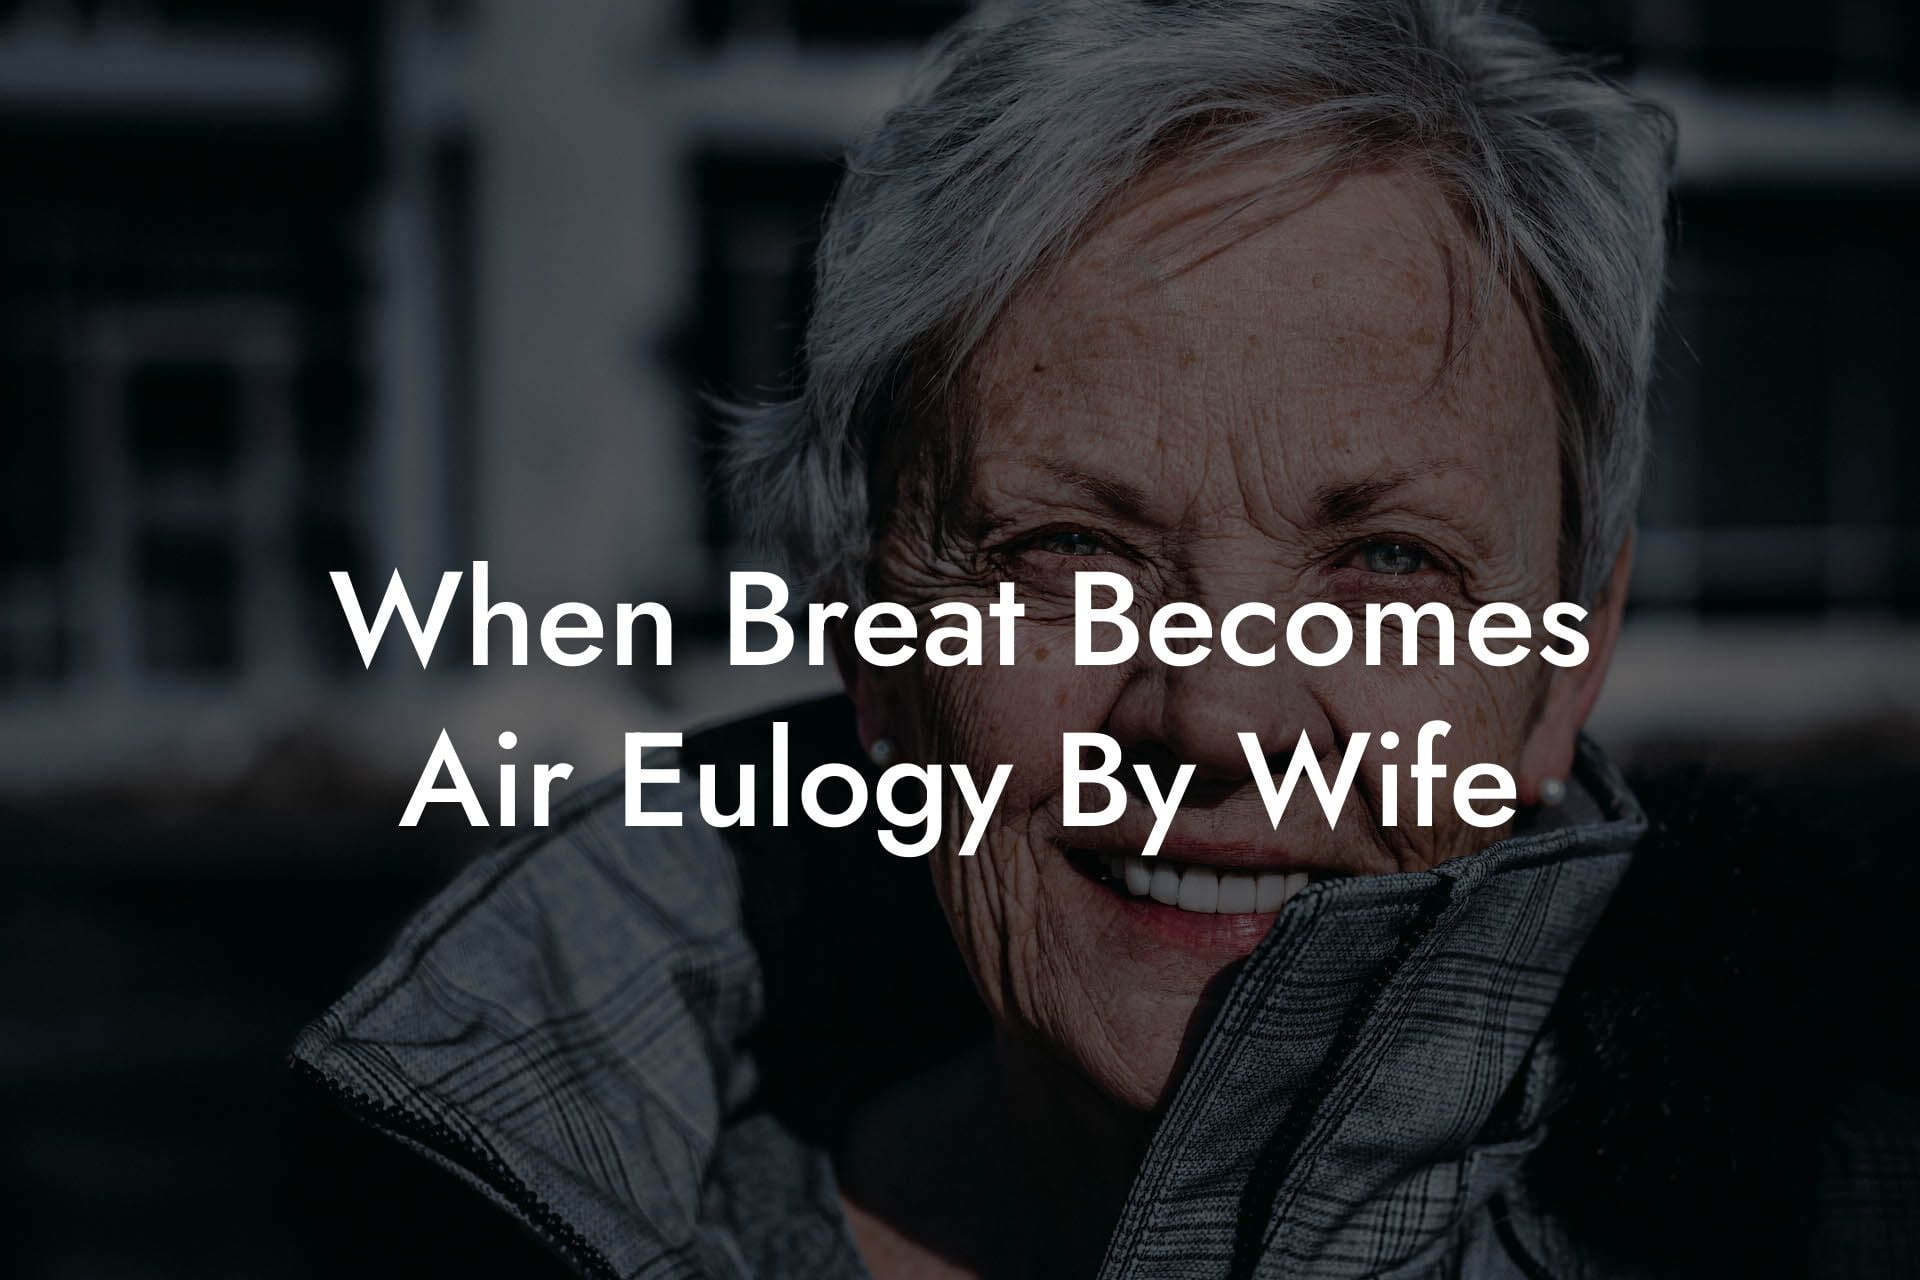 When Breat Becomes Air Eulogy By Wife